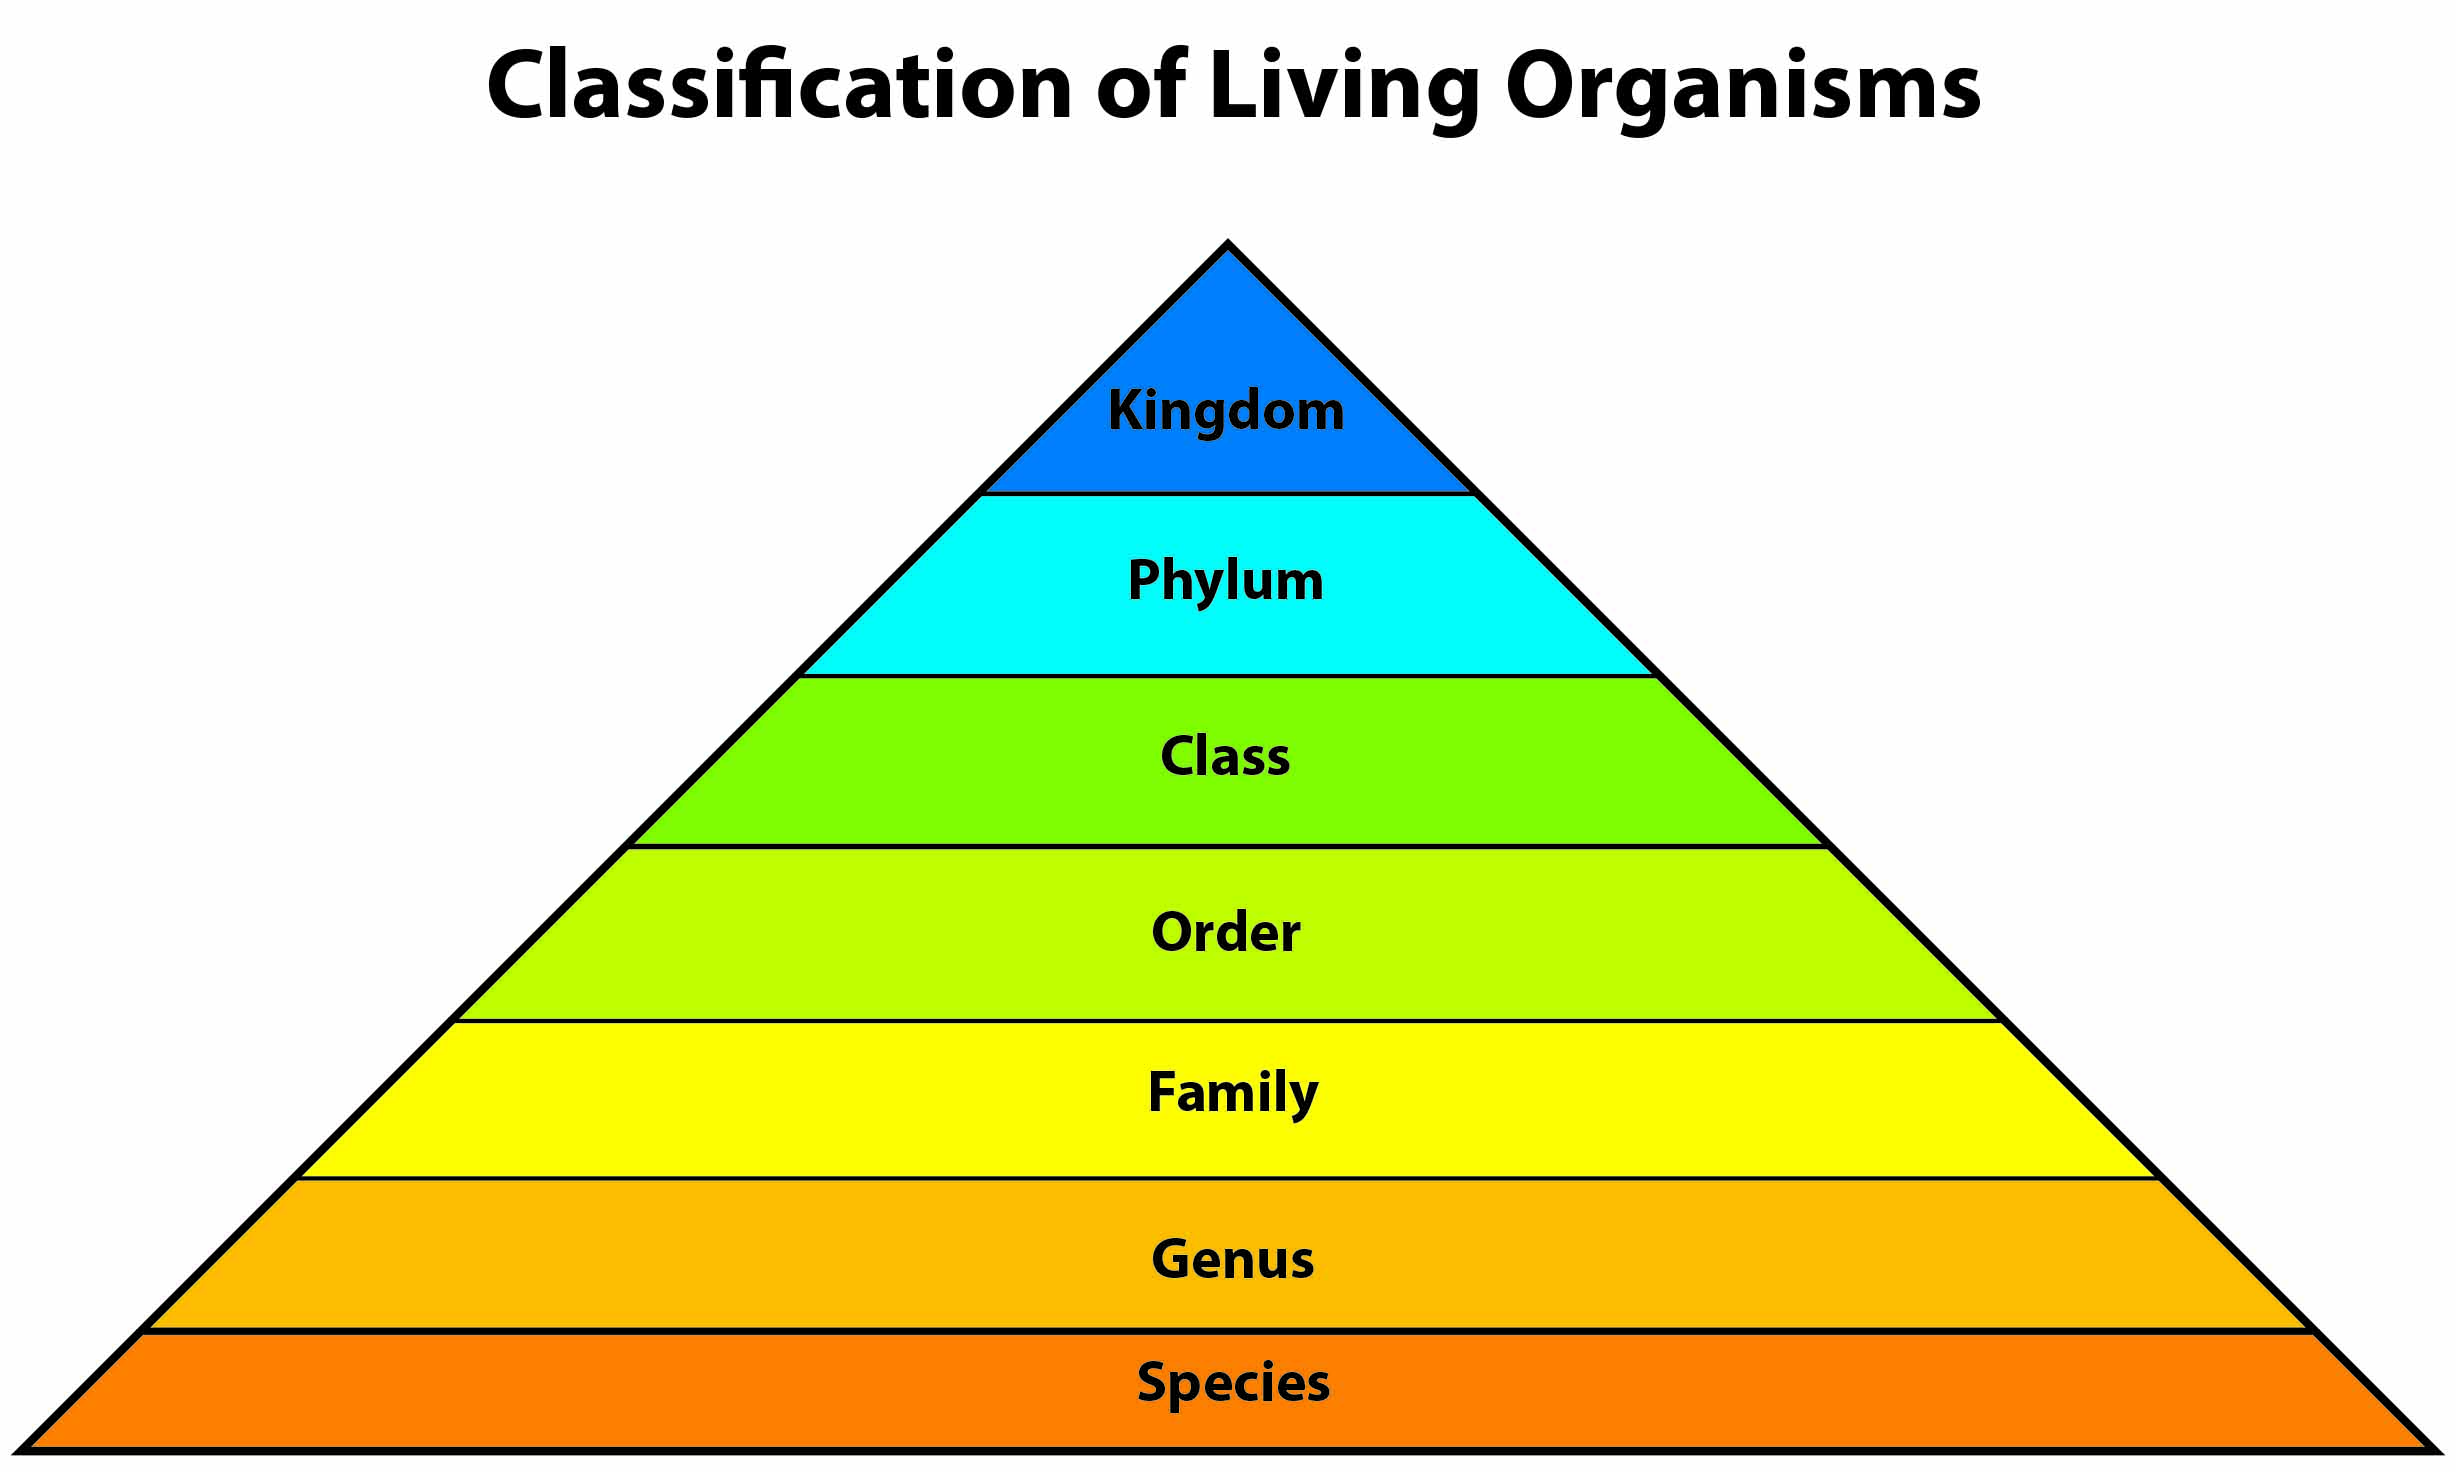 9 Best Images Of Classification Of Living Organisms Worksheet Riset